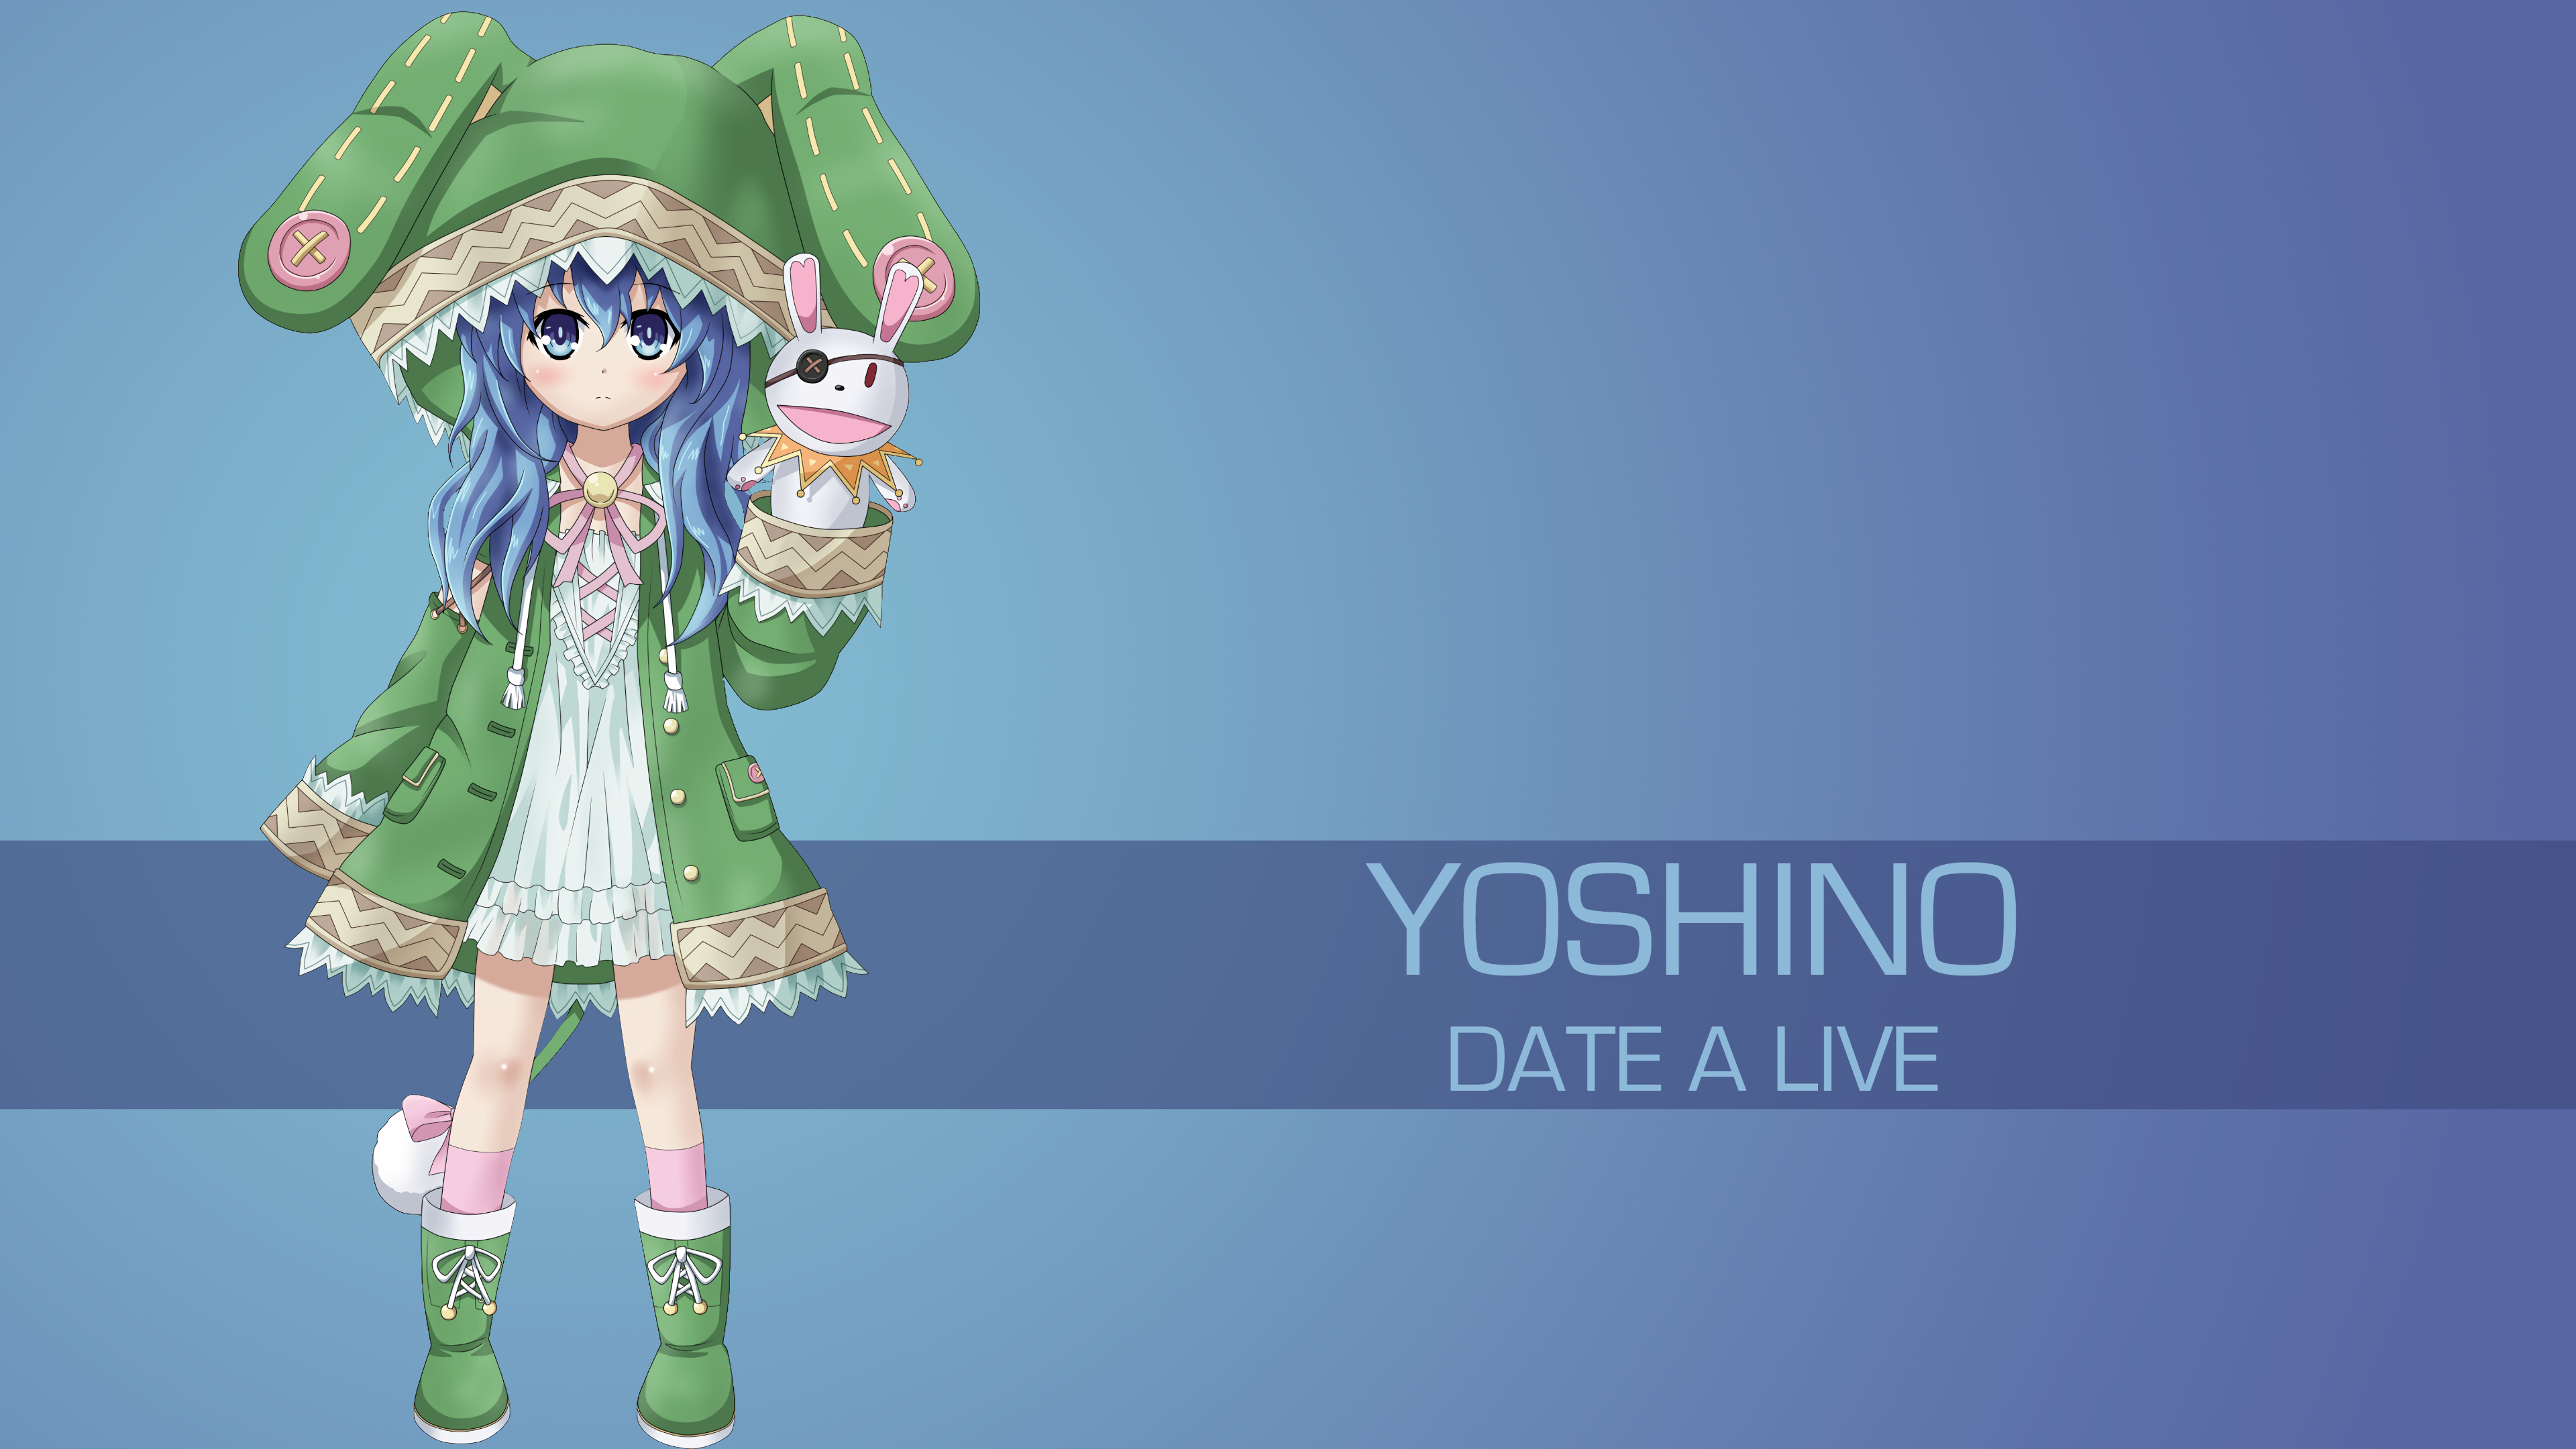 3840x2160 50+ Yoshino (Date A Live) HD Wallpapers and Backgrounds